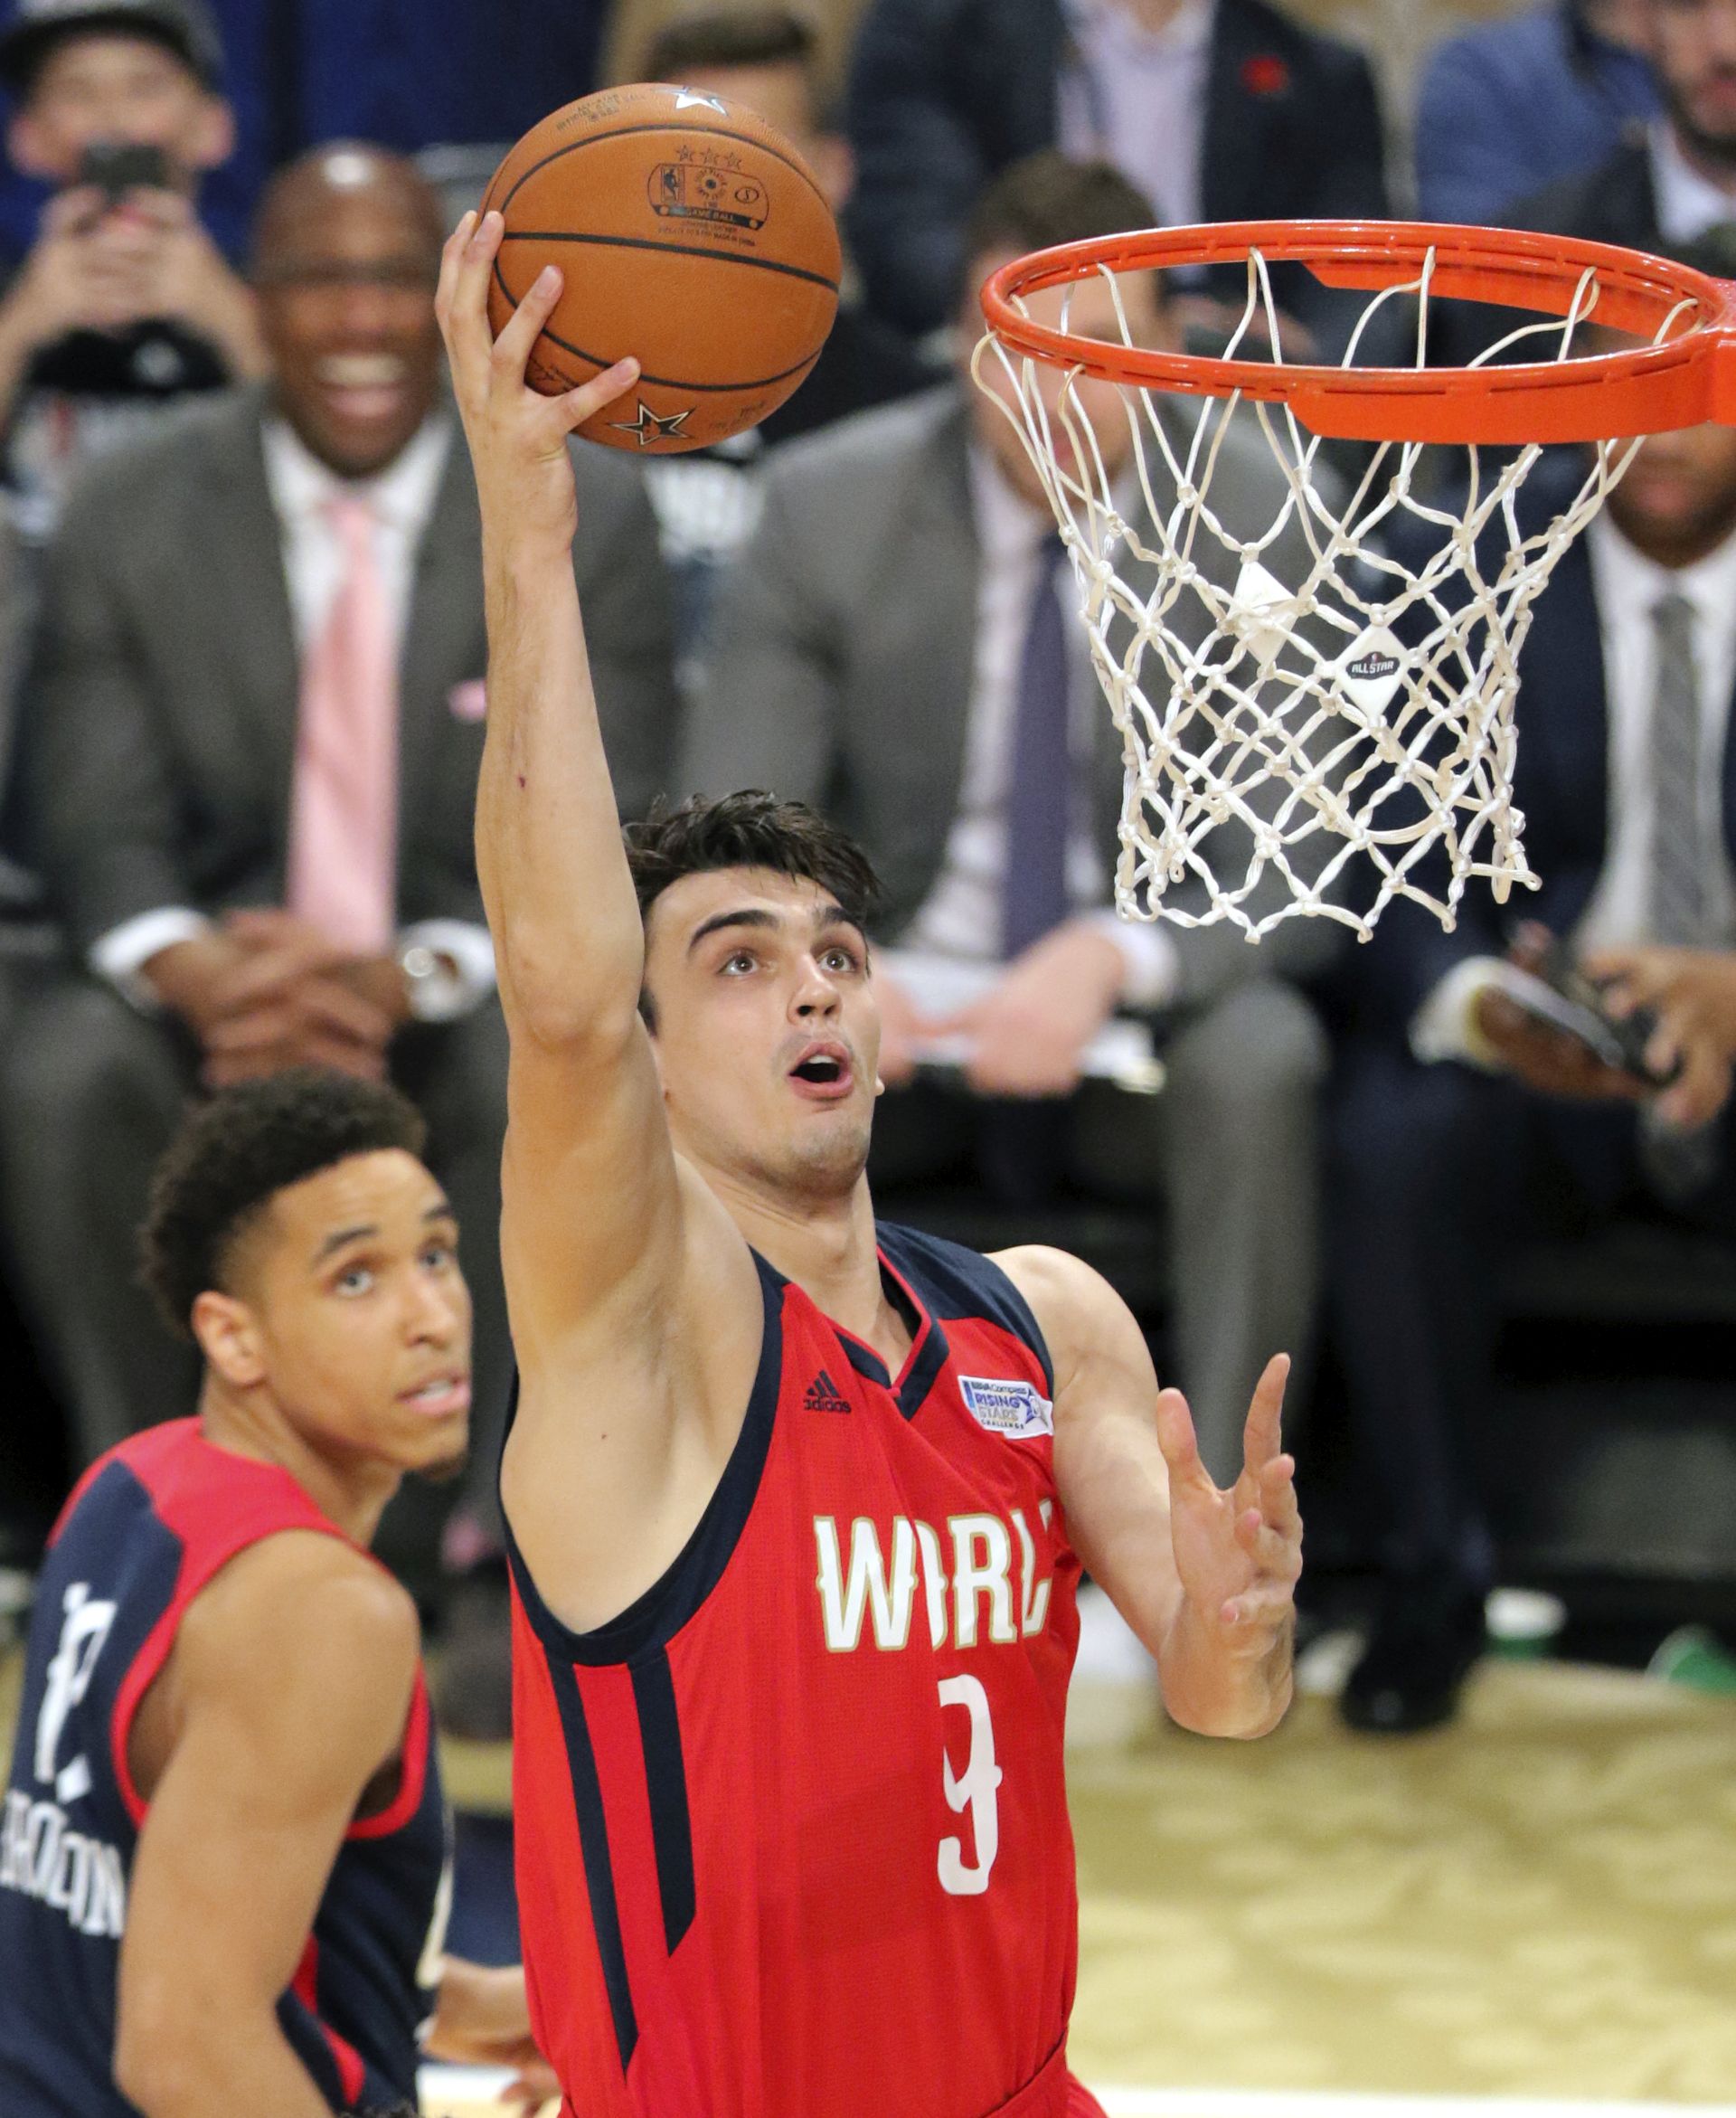 epa05800965 World Team player Dario Saric of Croatia goes to the basket against the United States team during the NBA Rising Stars Challenge at Smoothie King Center, part of the NBA All-Star weekend in New Orleans, Louisiana, 17 February 2017. The NBA All-Star Game will be played 19 February in New Orleans.  EPA/DAN ANDERSON